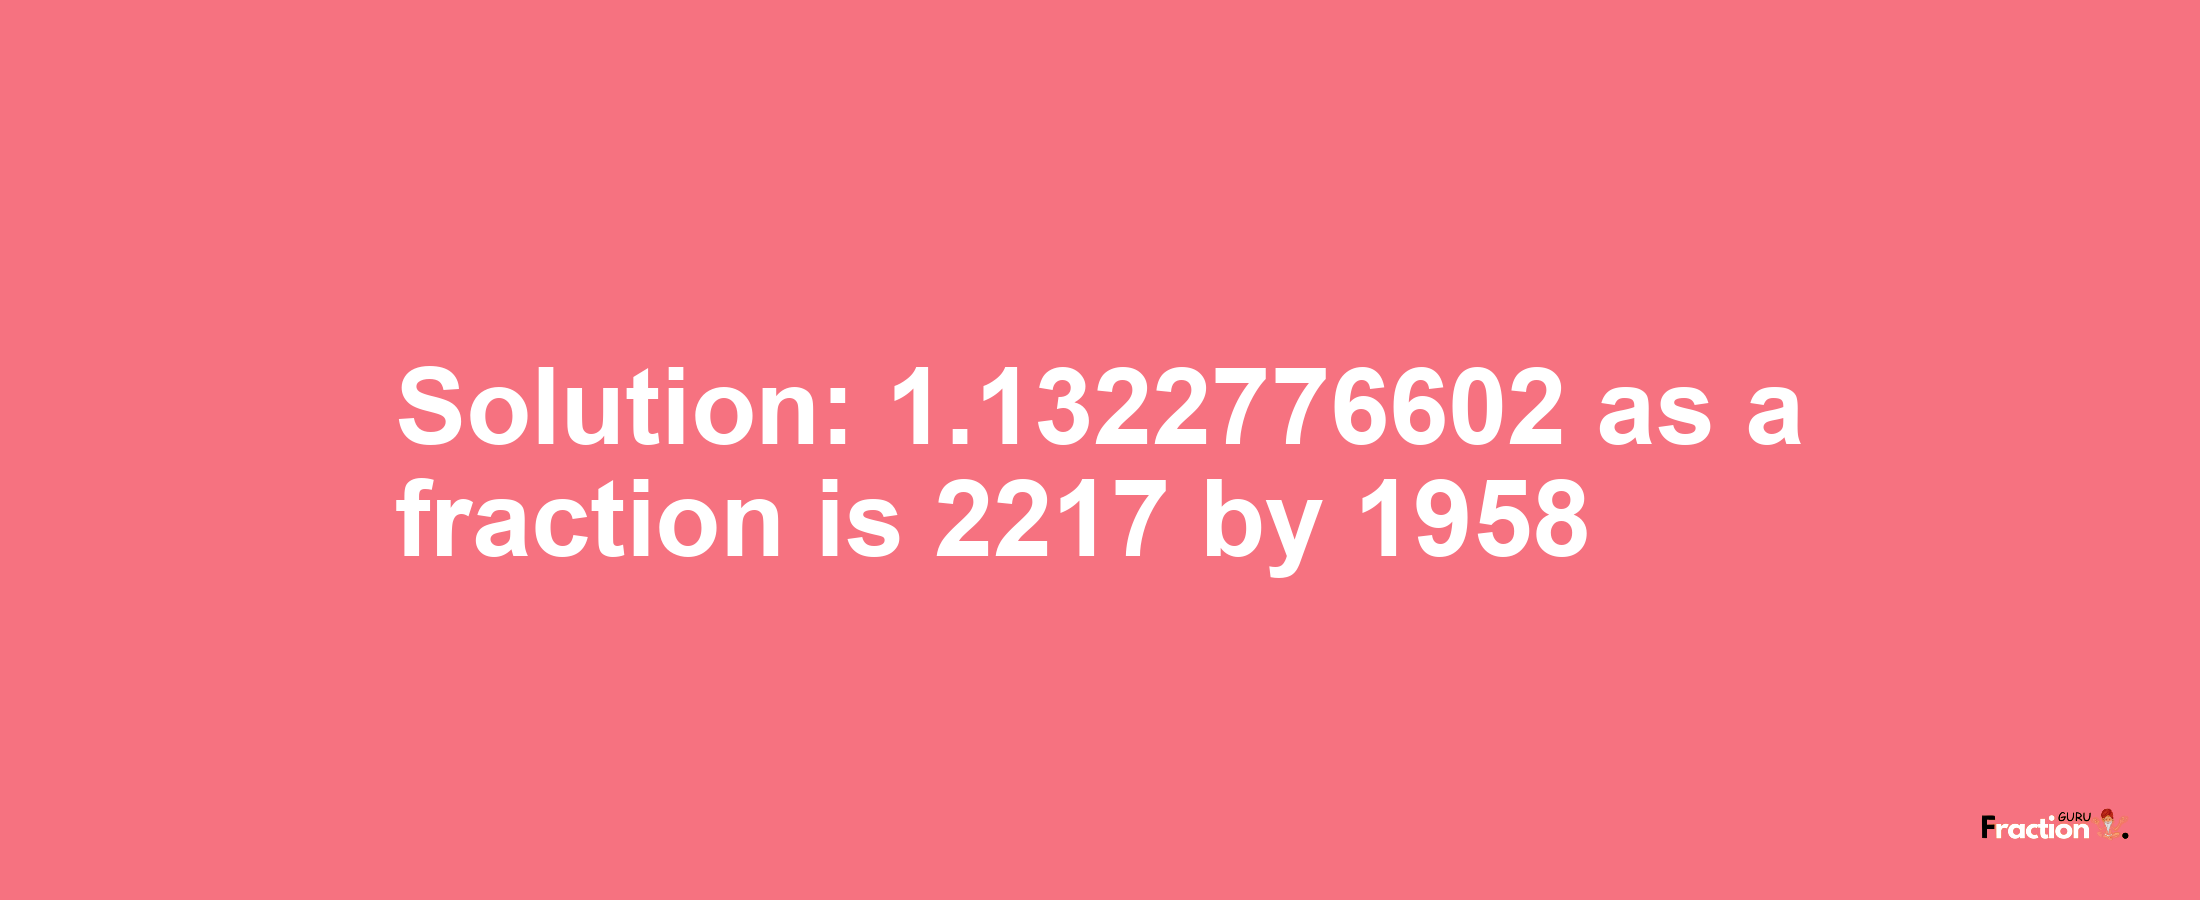 Solution:1.1322776602 as a fraction is 2217/1958